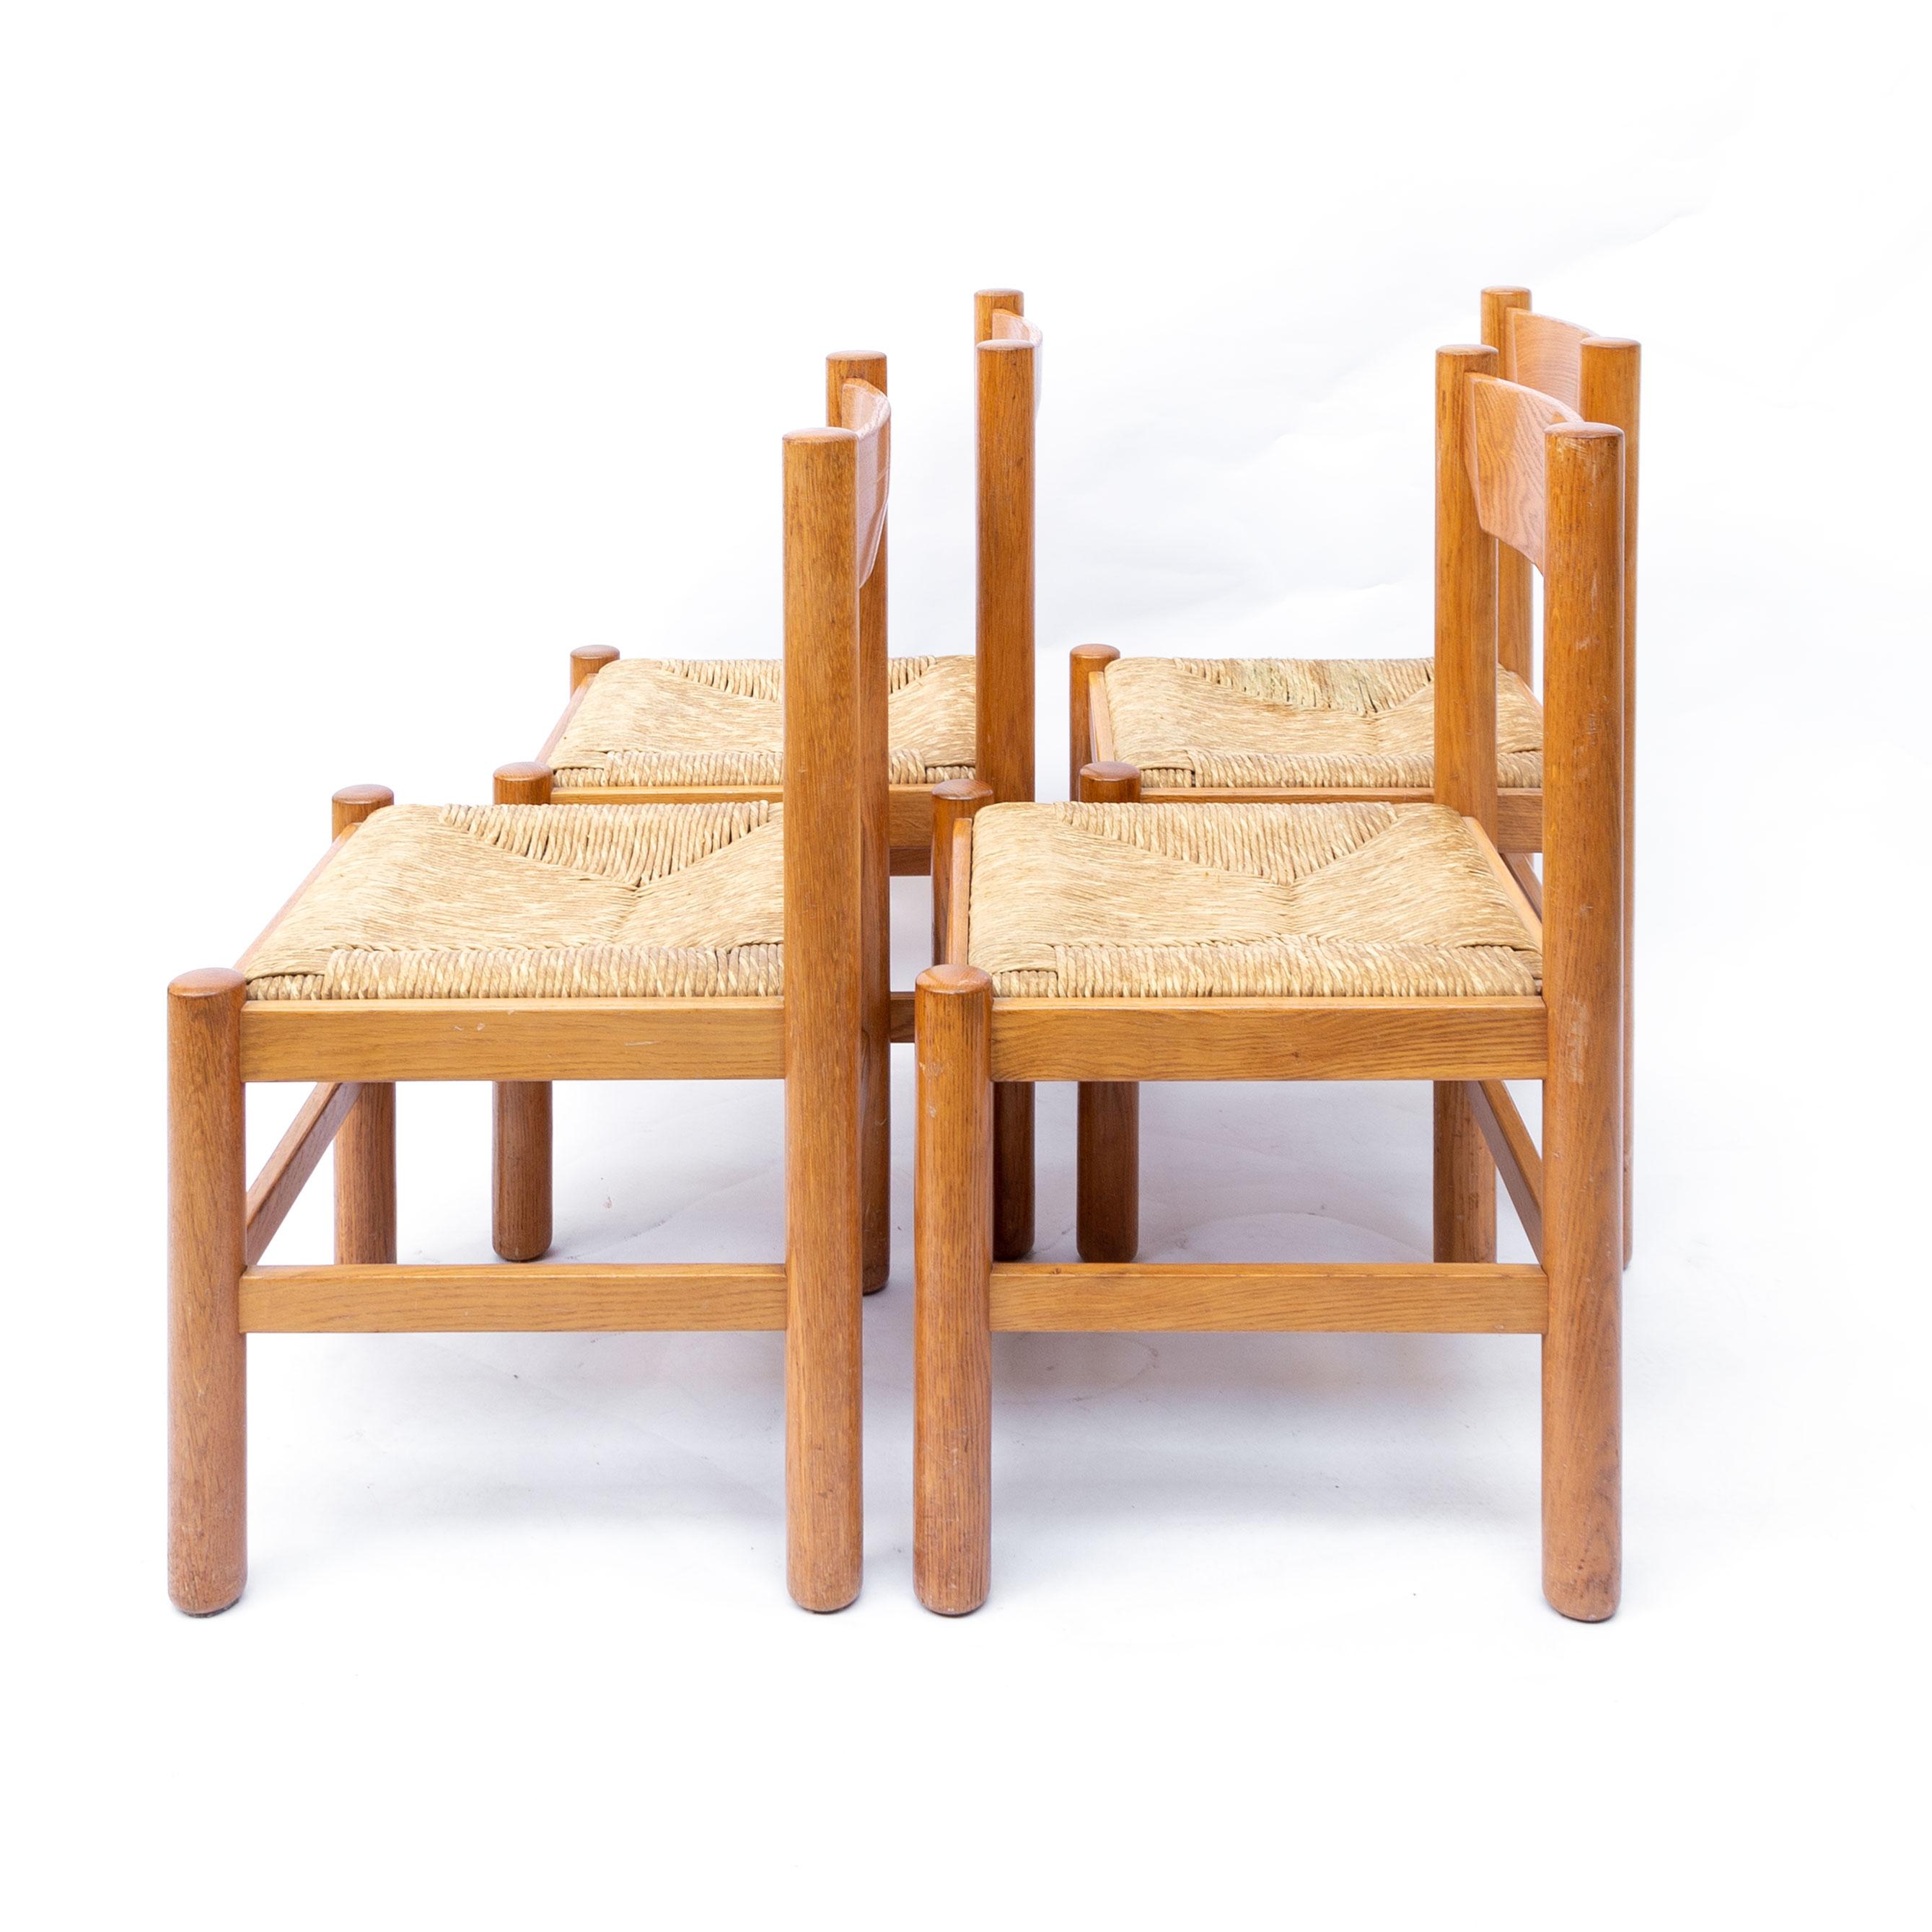 Set of four dining chairs in the style attributed to Vico Magistretti. Wooden frame with rush seatings. Good vintage condition. One seat has a slight stain of usage. The complete set is in good vintage condition. Sold as a set of 4.